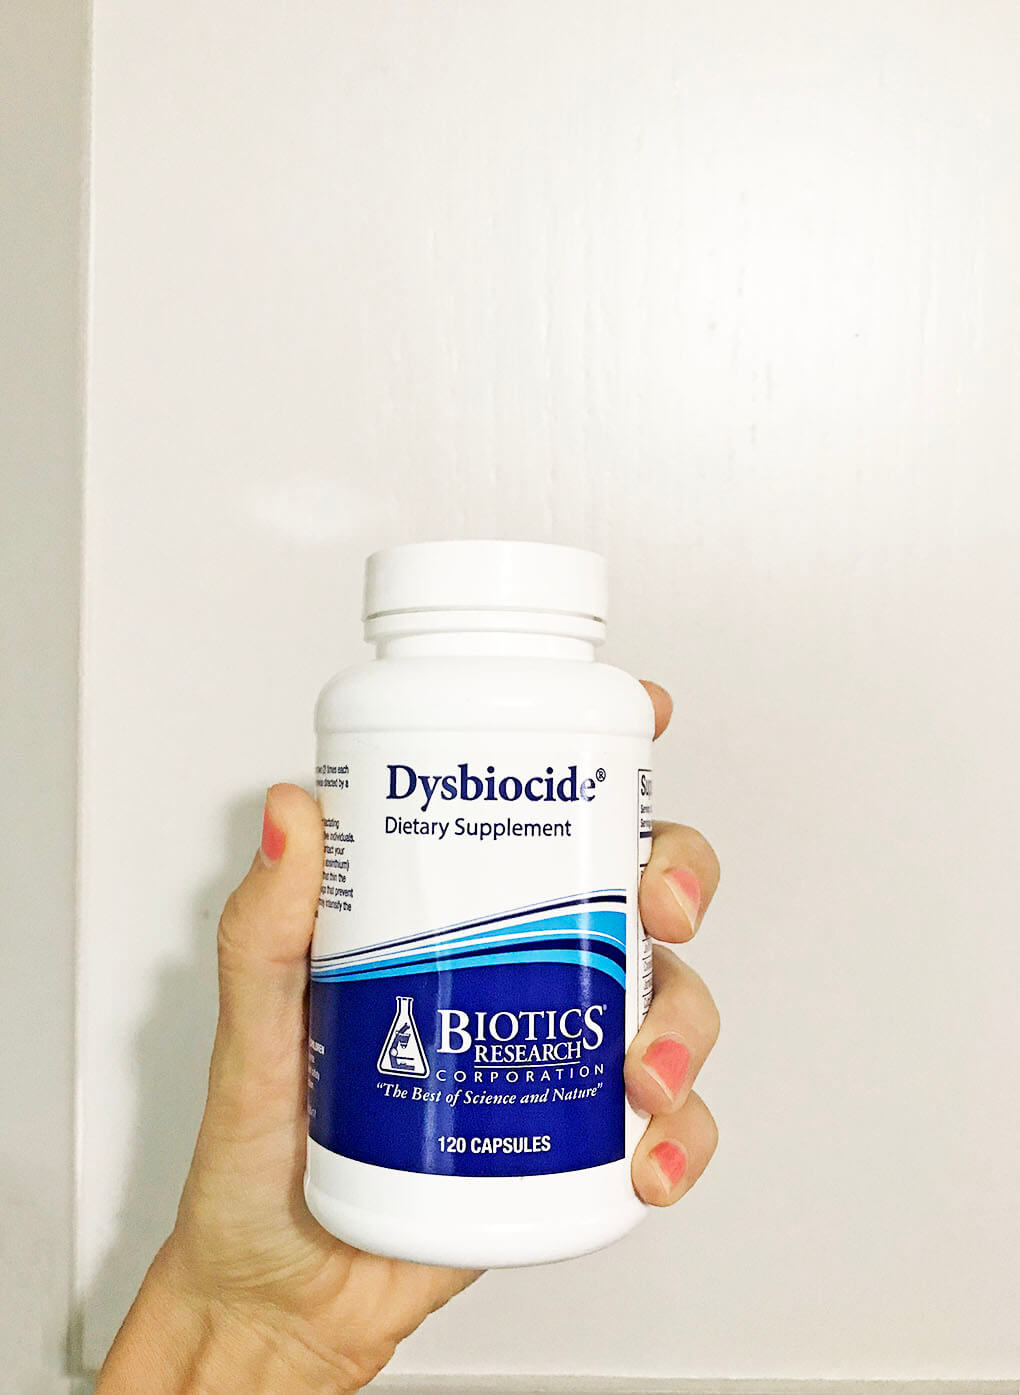 6 Supplements After SIBO Antibiotics www.sarahkayhoffman.com Dysbiocide #guthealth #healthyliving #SIBO #supplement